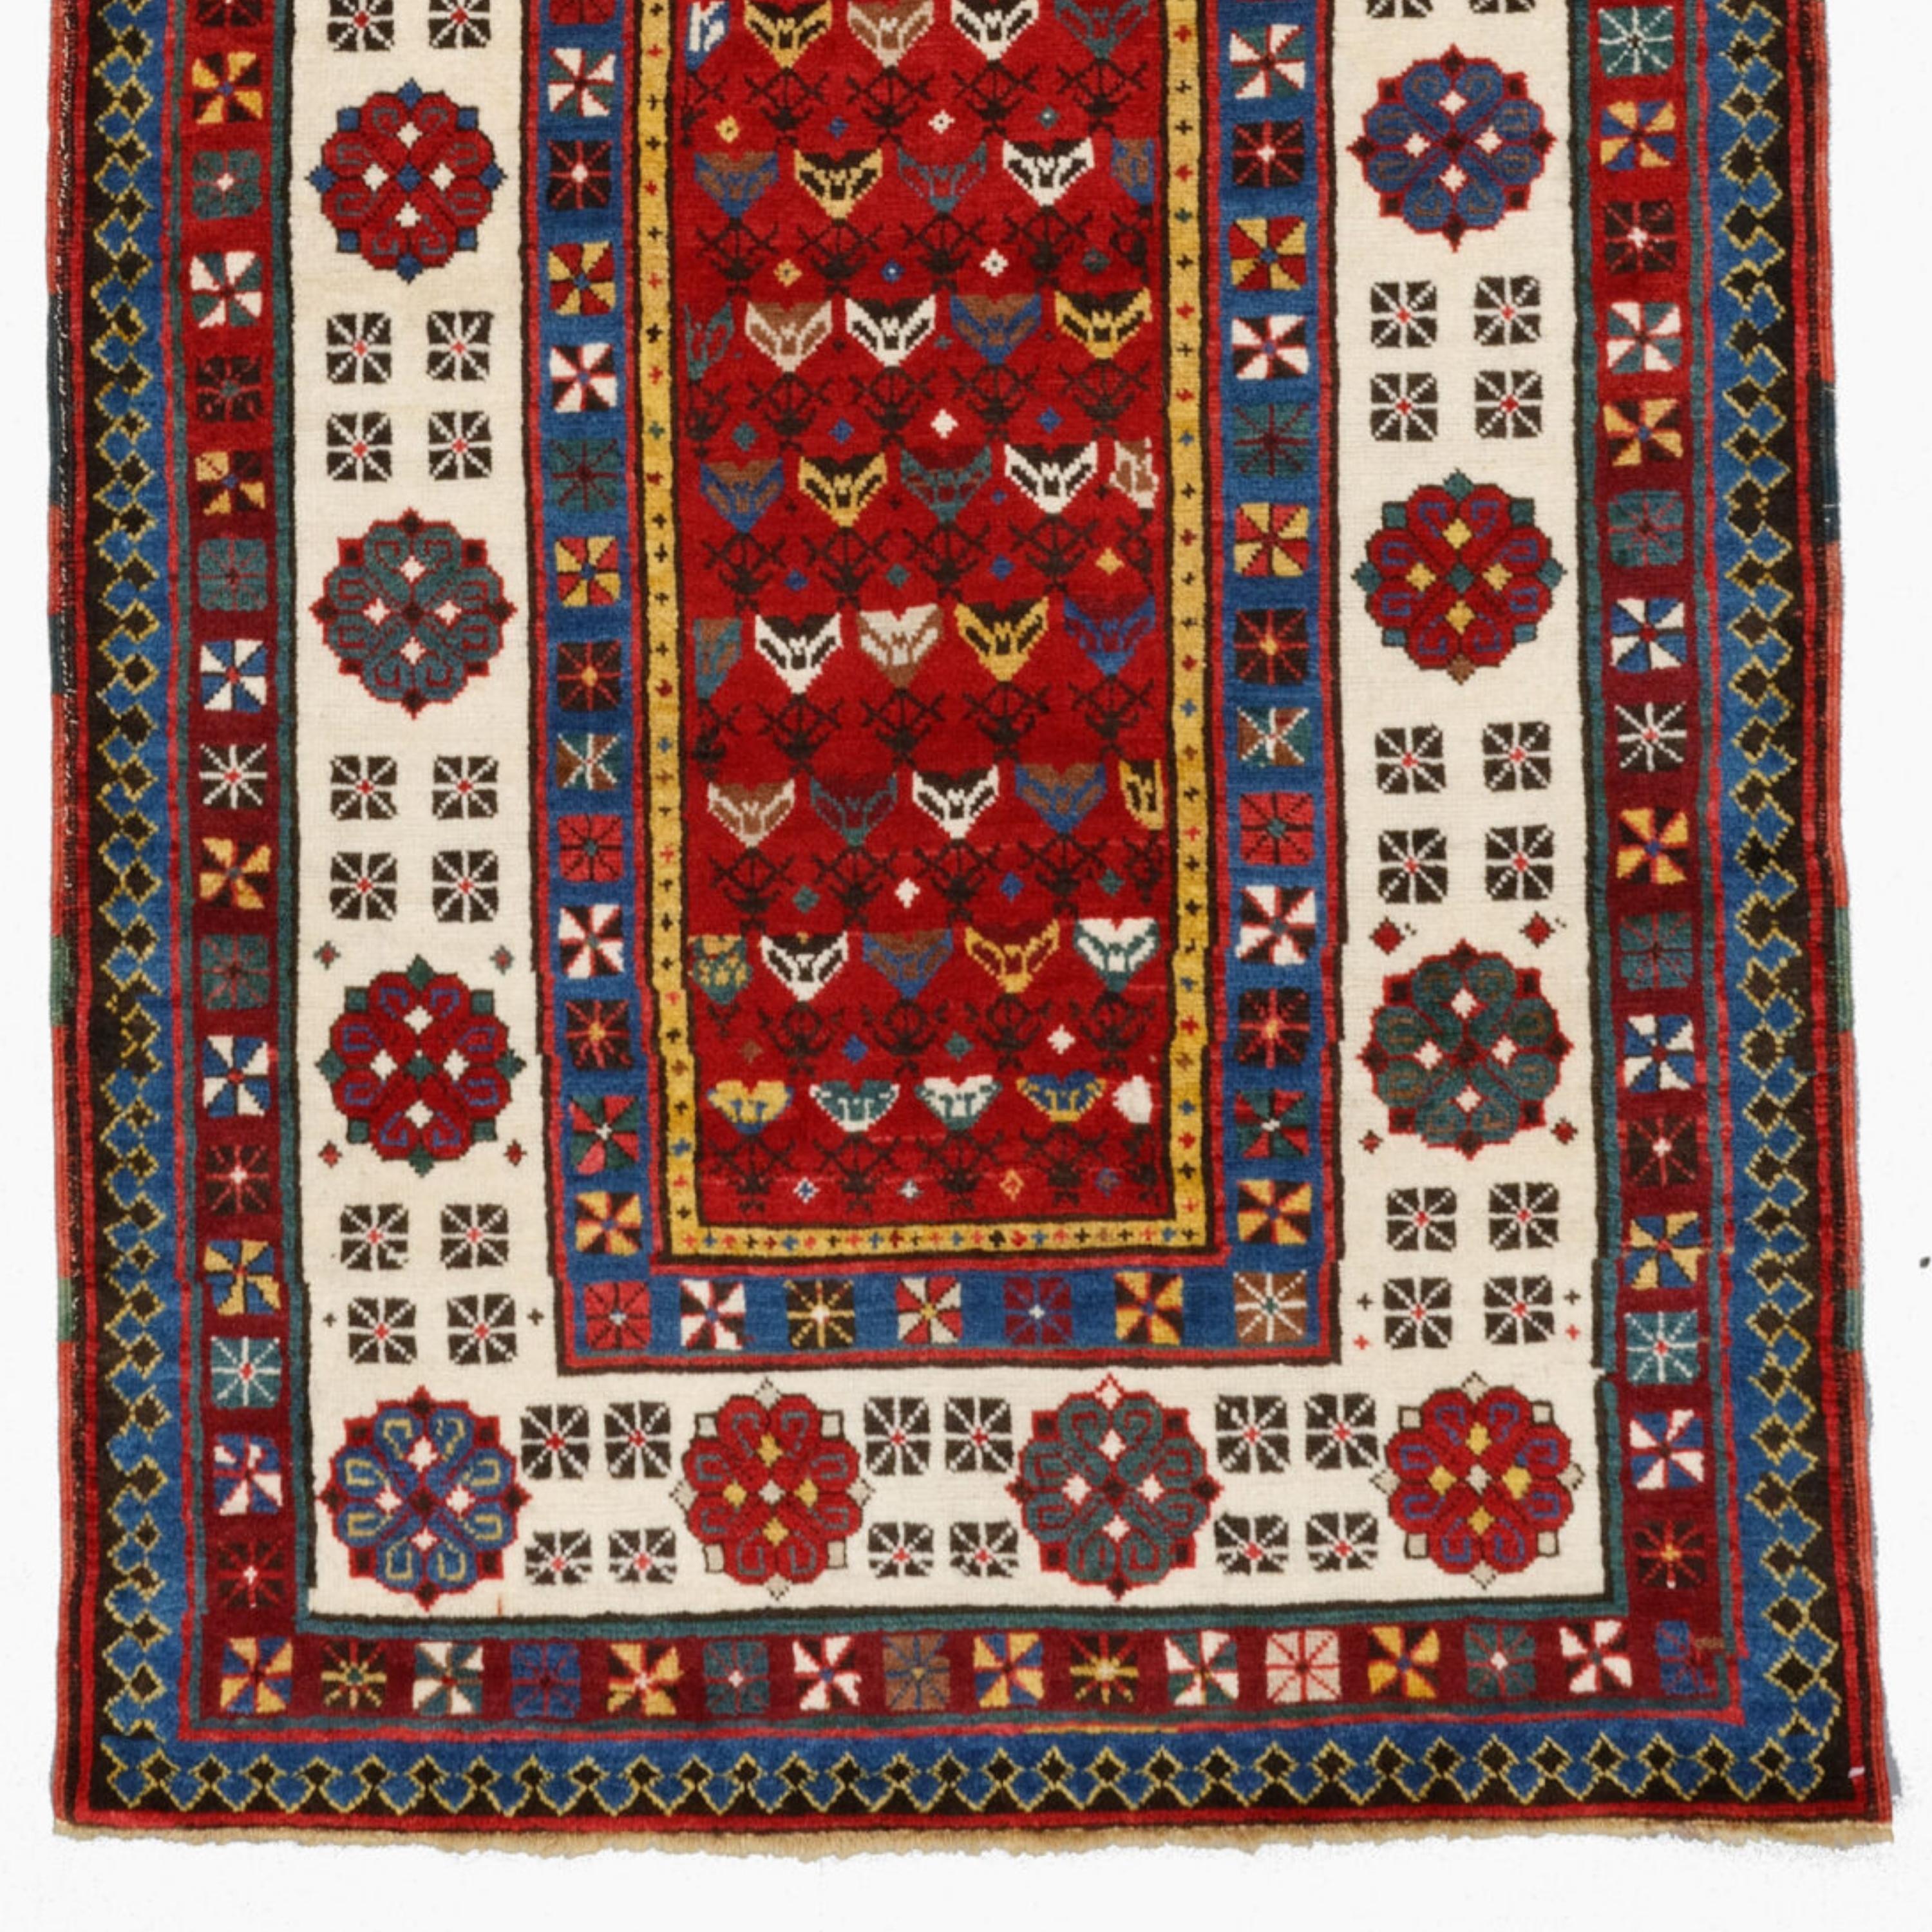 Antique Talish Rug
Late Of The 19th Century Caucasian Talish Rug
Size 100 x 230 cm (39,3x90,5 In)

Most Caucasian rugs are woven in regions of Kuba, Dagestan, Shirvan, Talish and Baku in the East, and Ghanjeh, Kazak, and Karabagh in the southwest